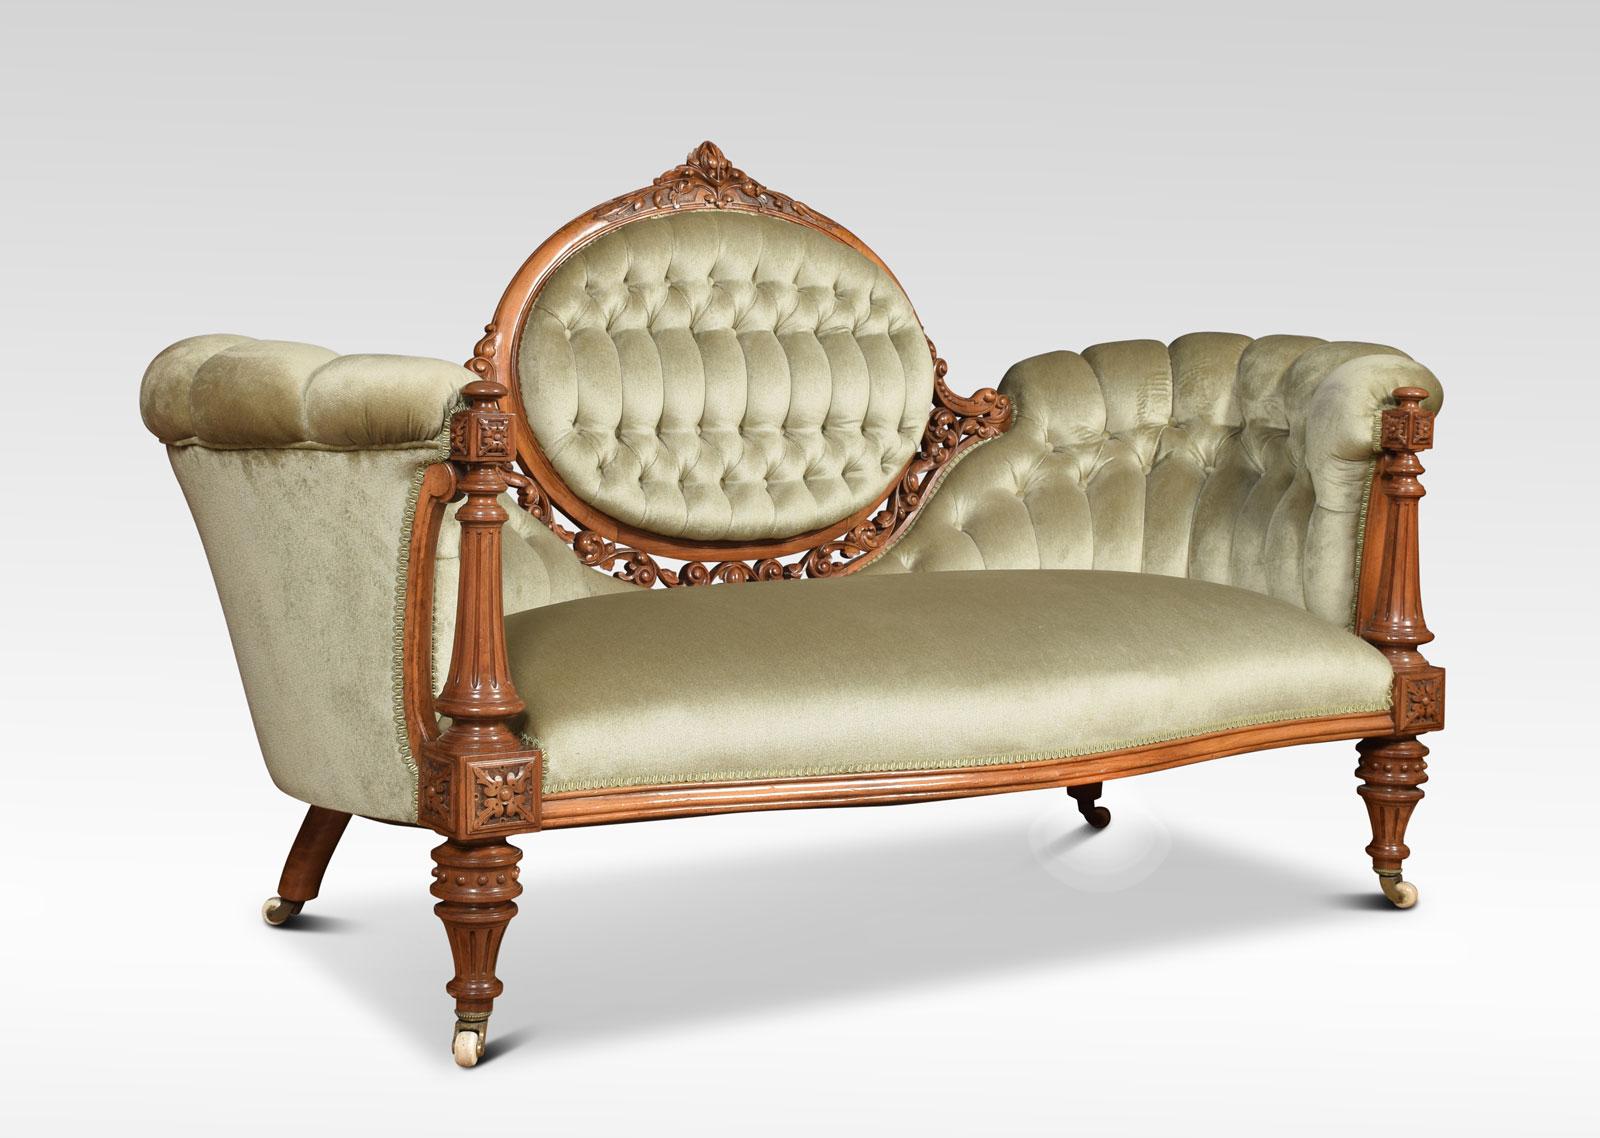 Carved walnut cameo back settee the show framed back, with deep buttoned velvet upholstery. To the shaped arms above turned fluted front supports terminating in brass ceramic castors.
Dimensions
Height 40.5 inches height to seat 18.5